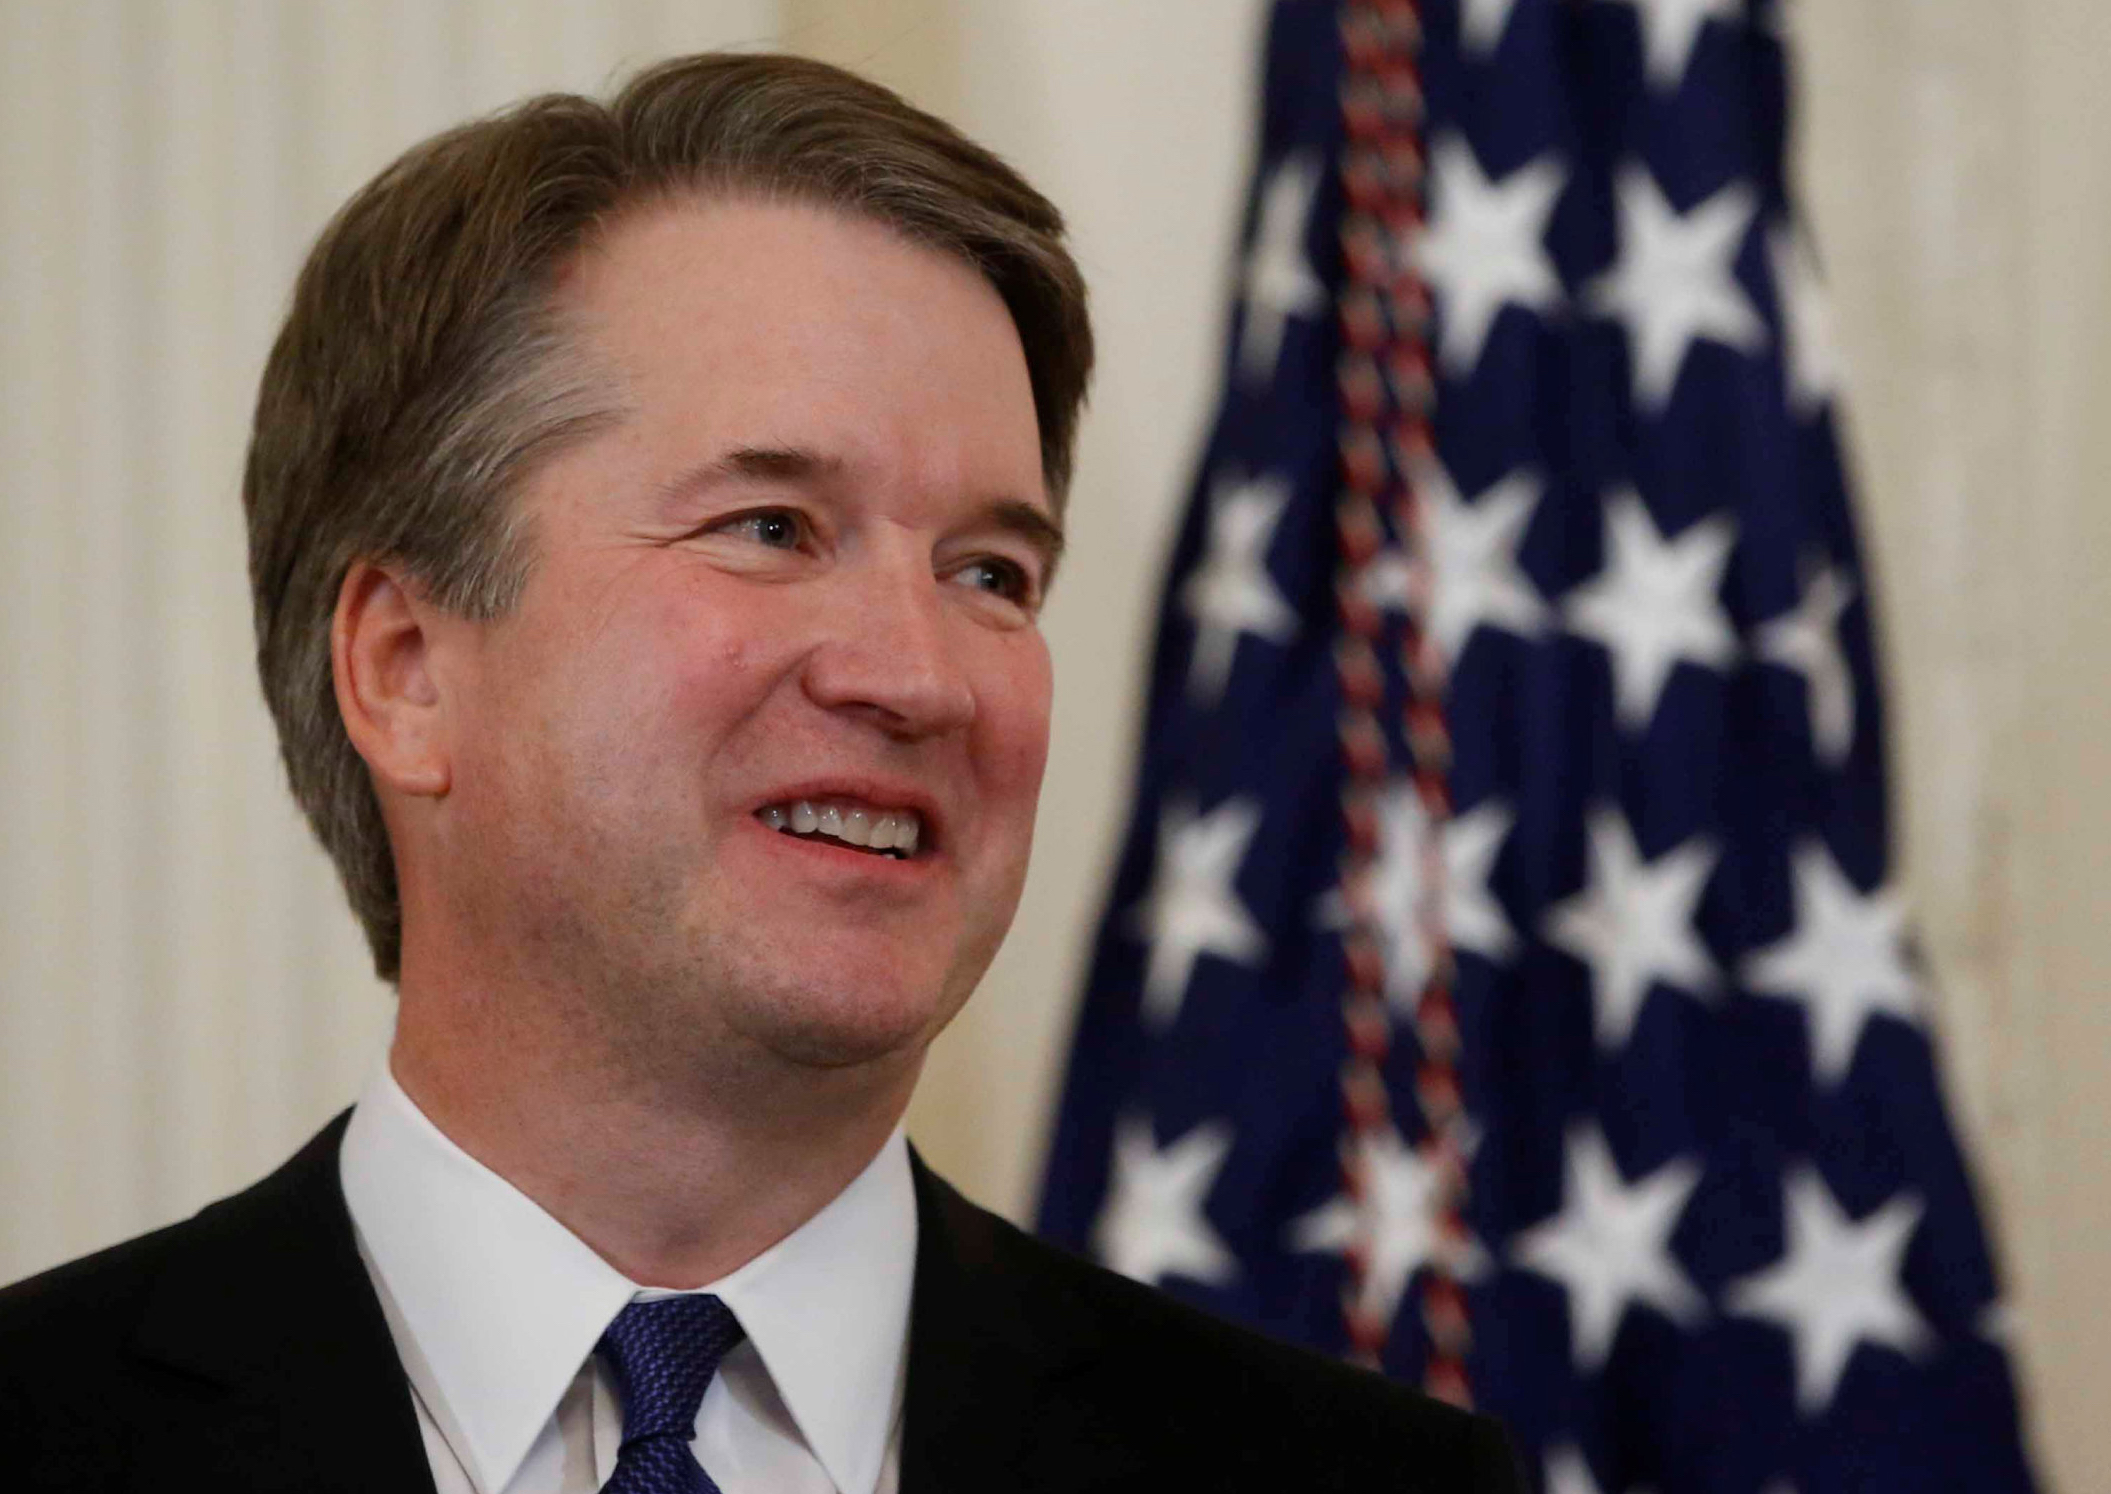 Here are summaries of some of Judge Kavanaugh's most notable opinions